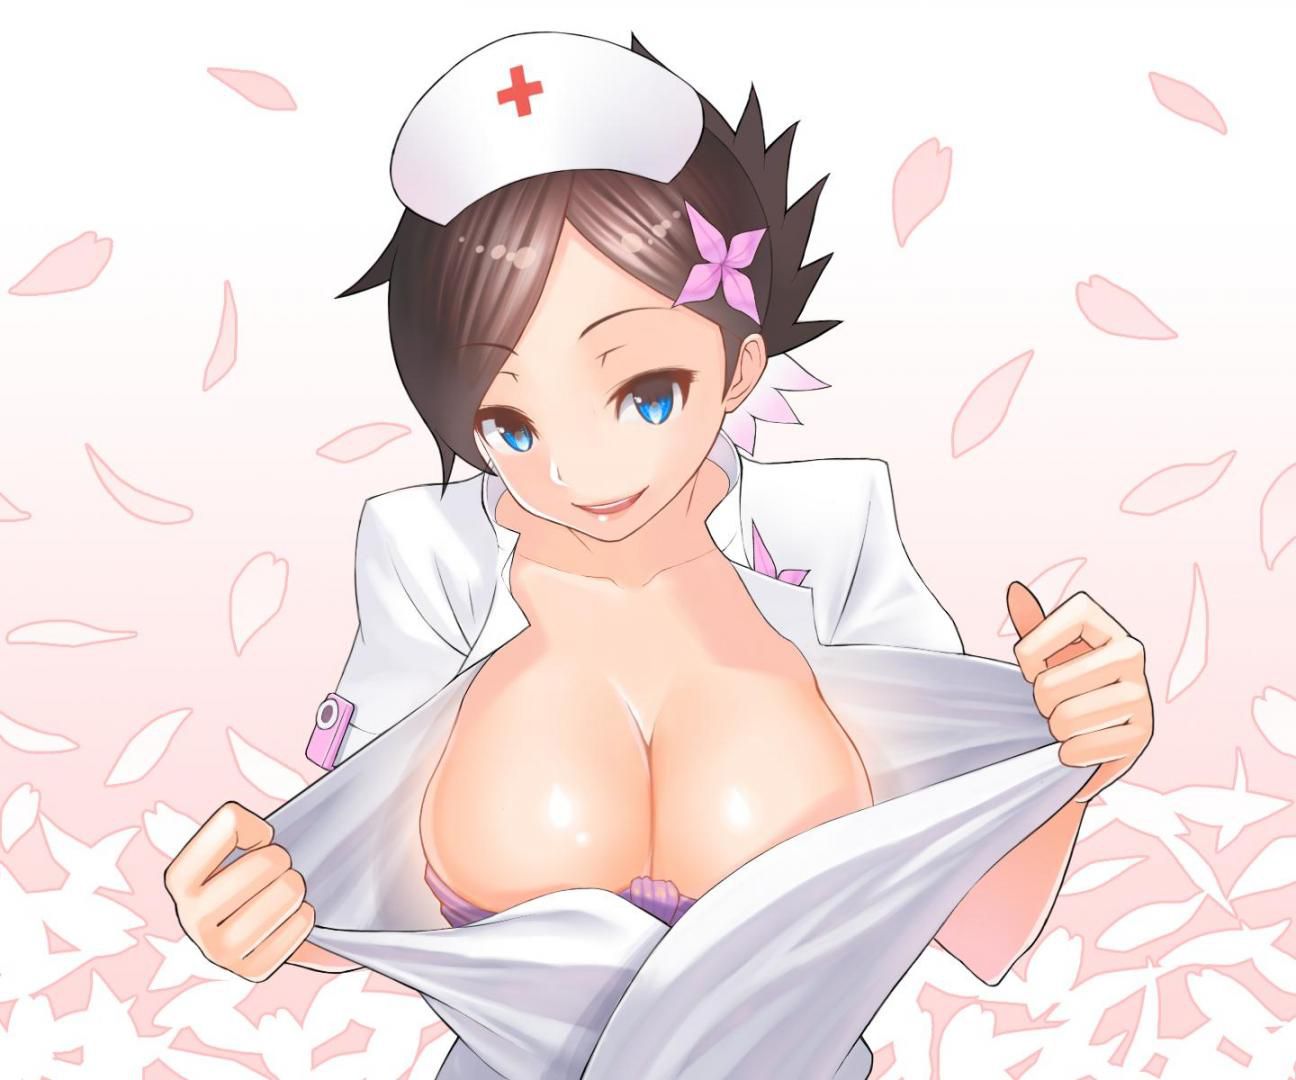 【Erotic Anime Summary】 Erotic image of a nurse who is both furious and fierce 【Secondary erotic】 11